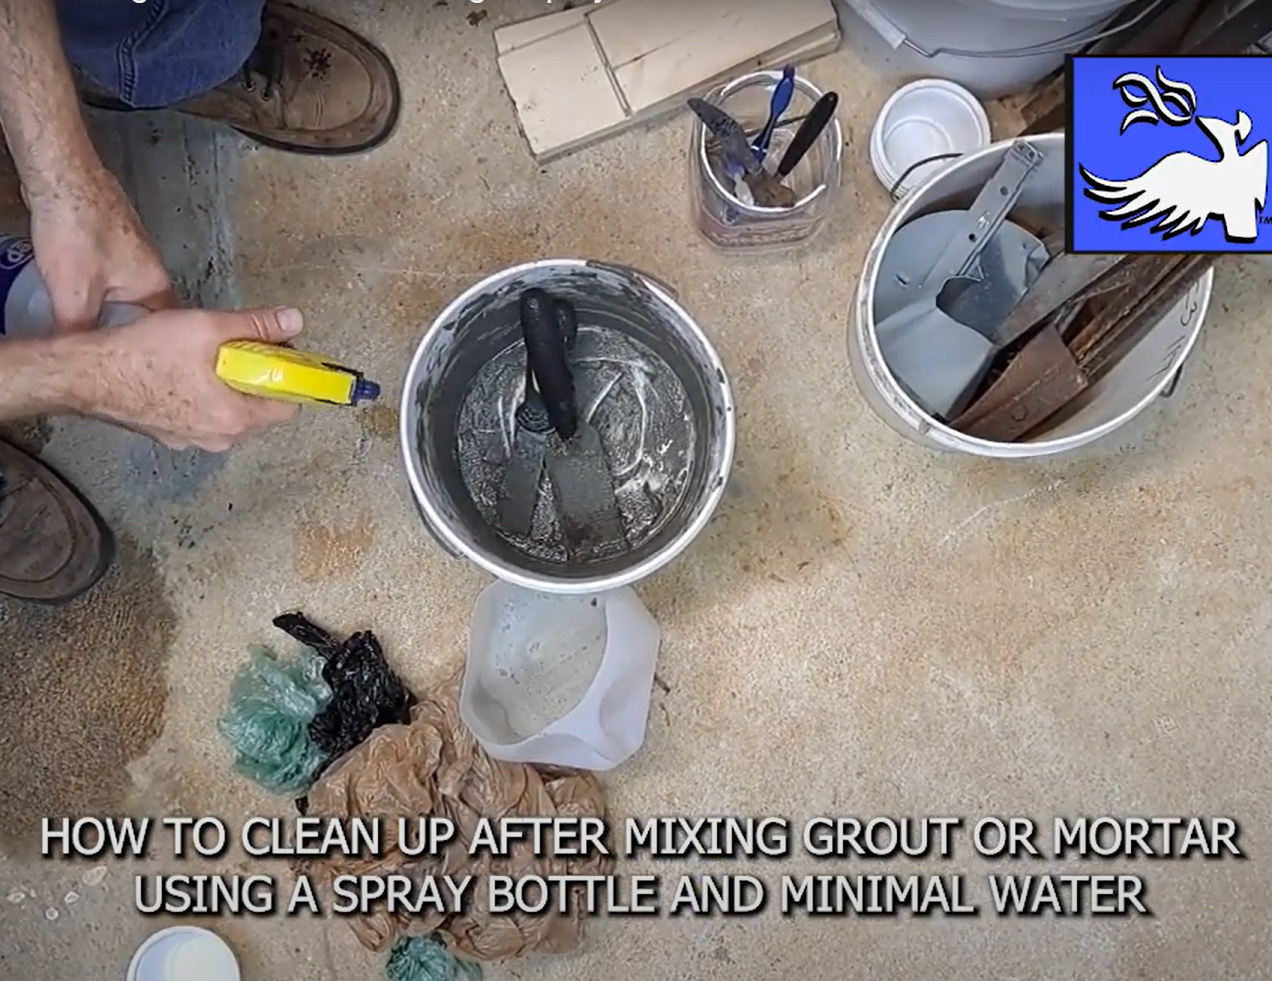 How To Clean Up After Mixing Grout Or Mortar